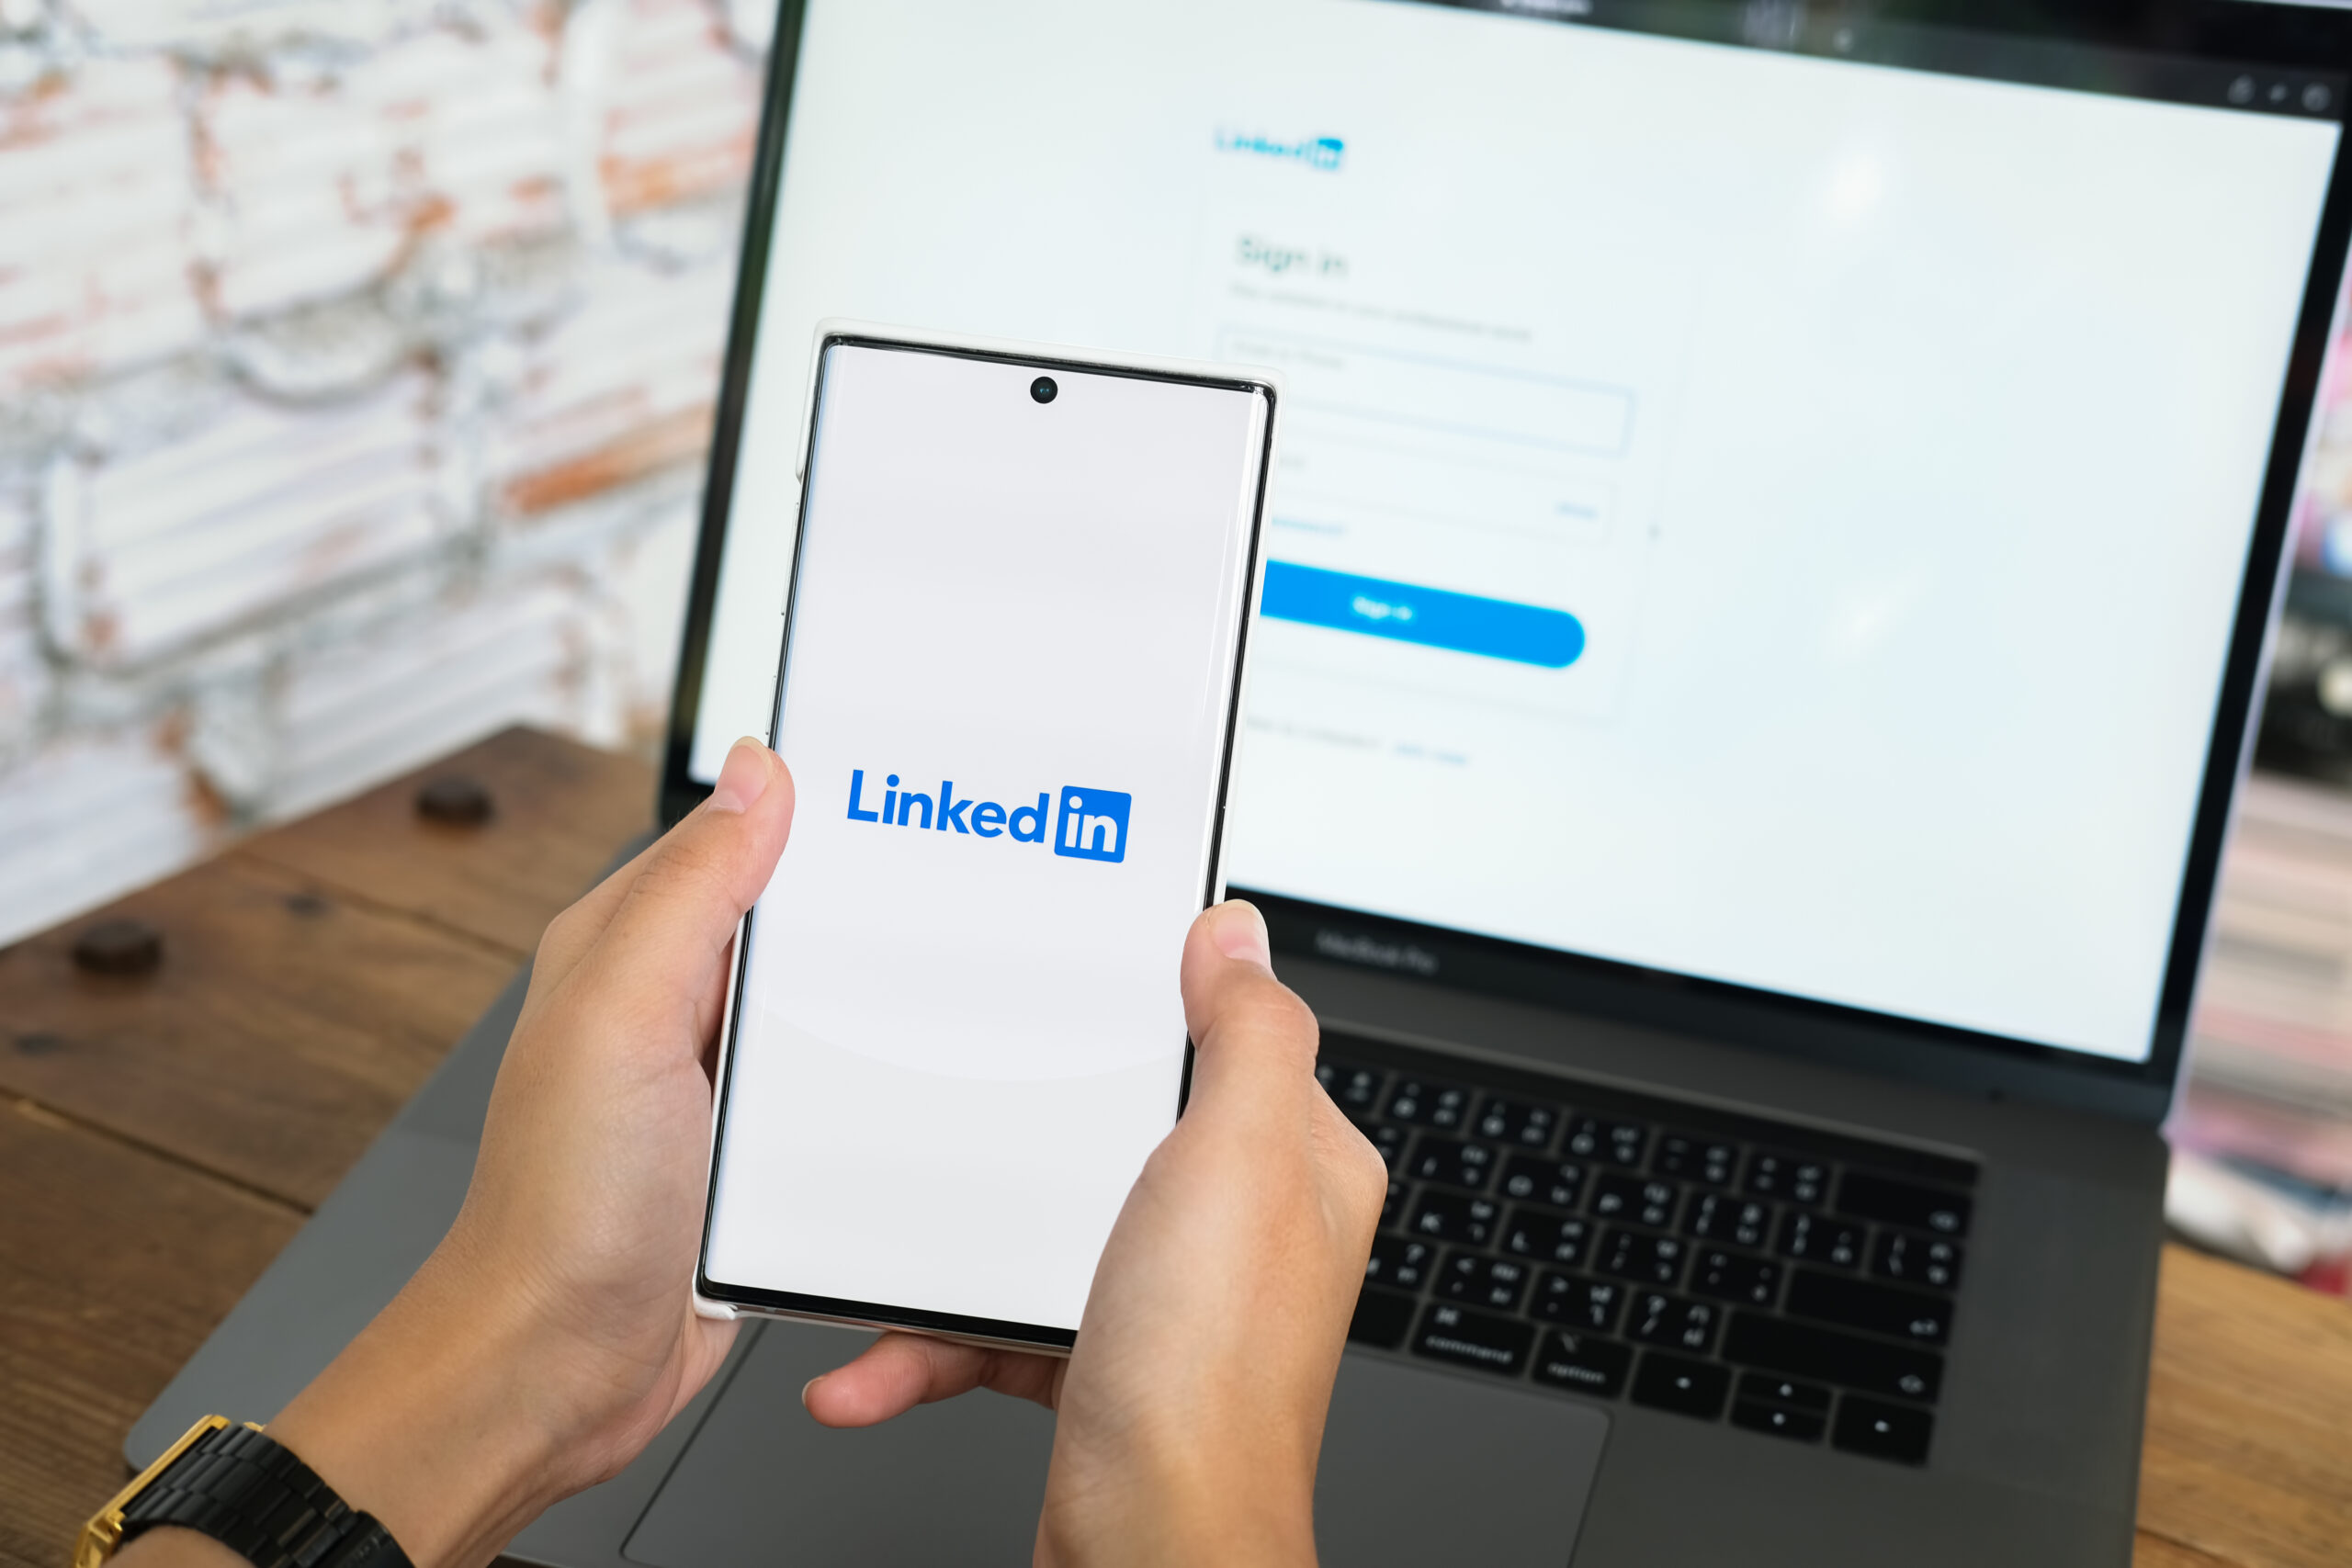 LinkedIn importance as the user opens it in both mobile and Computer